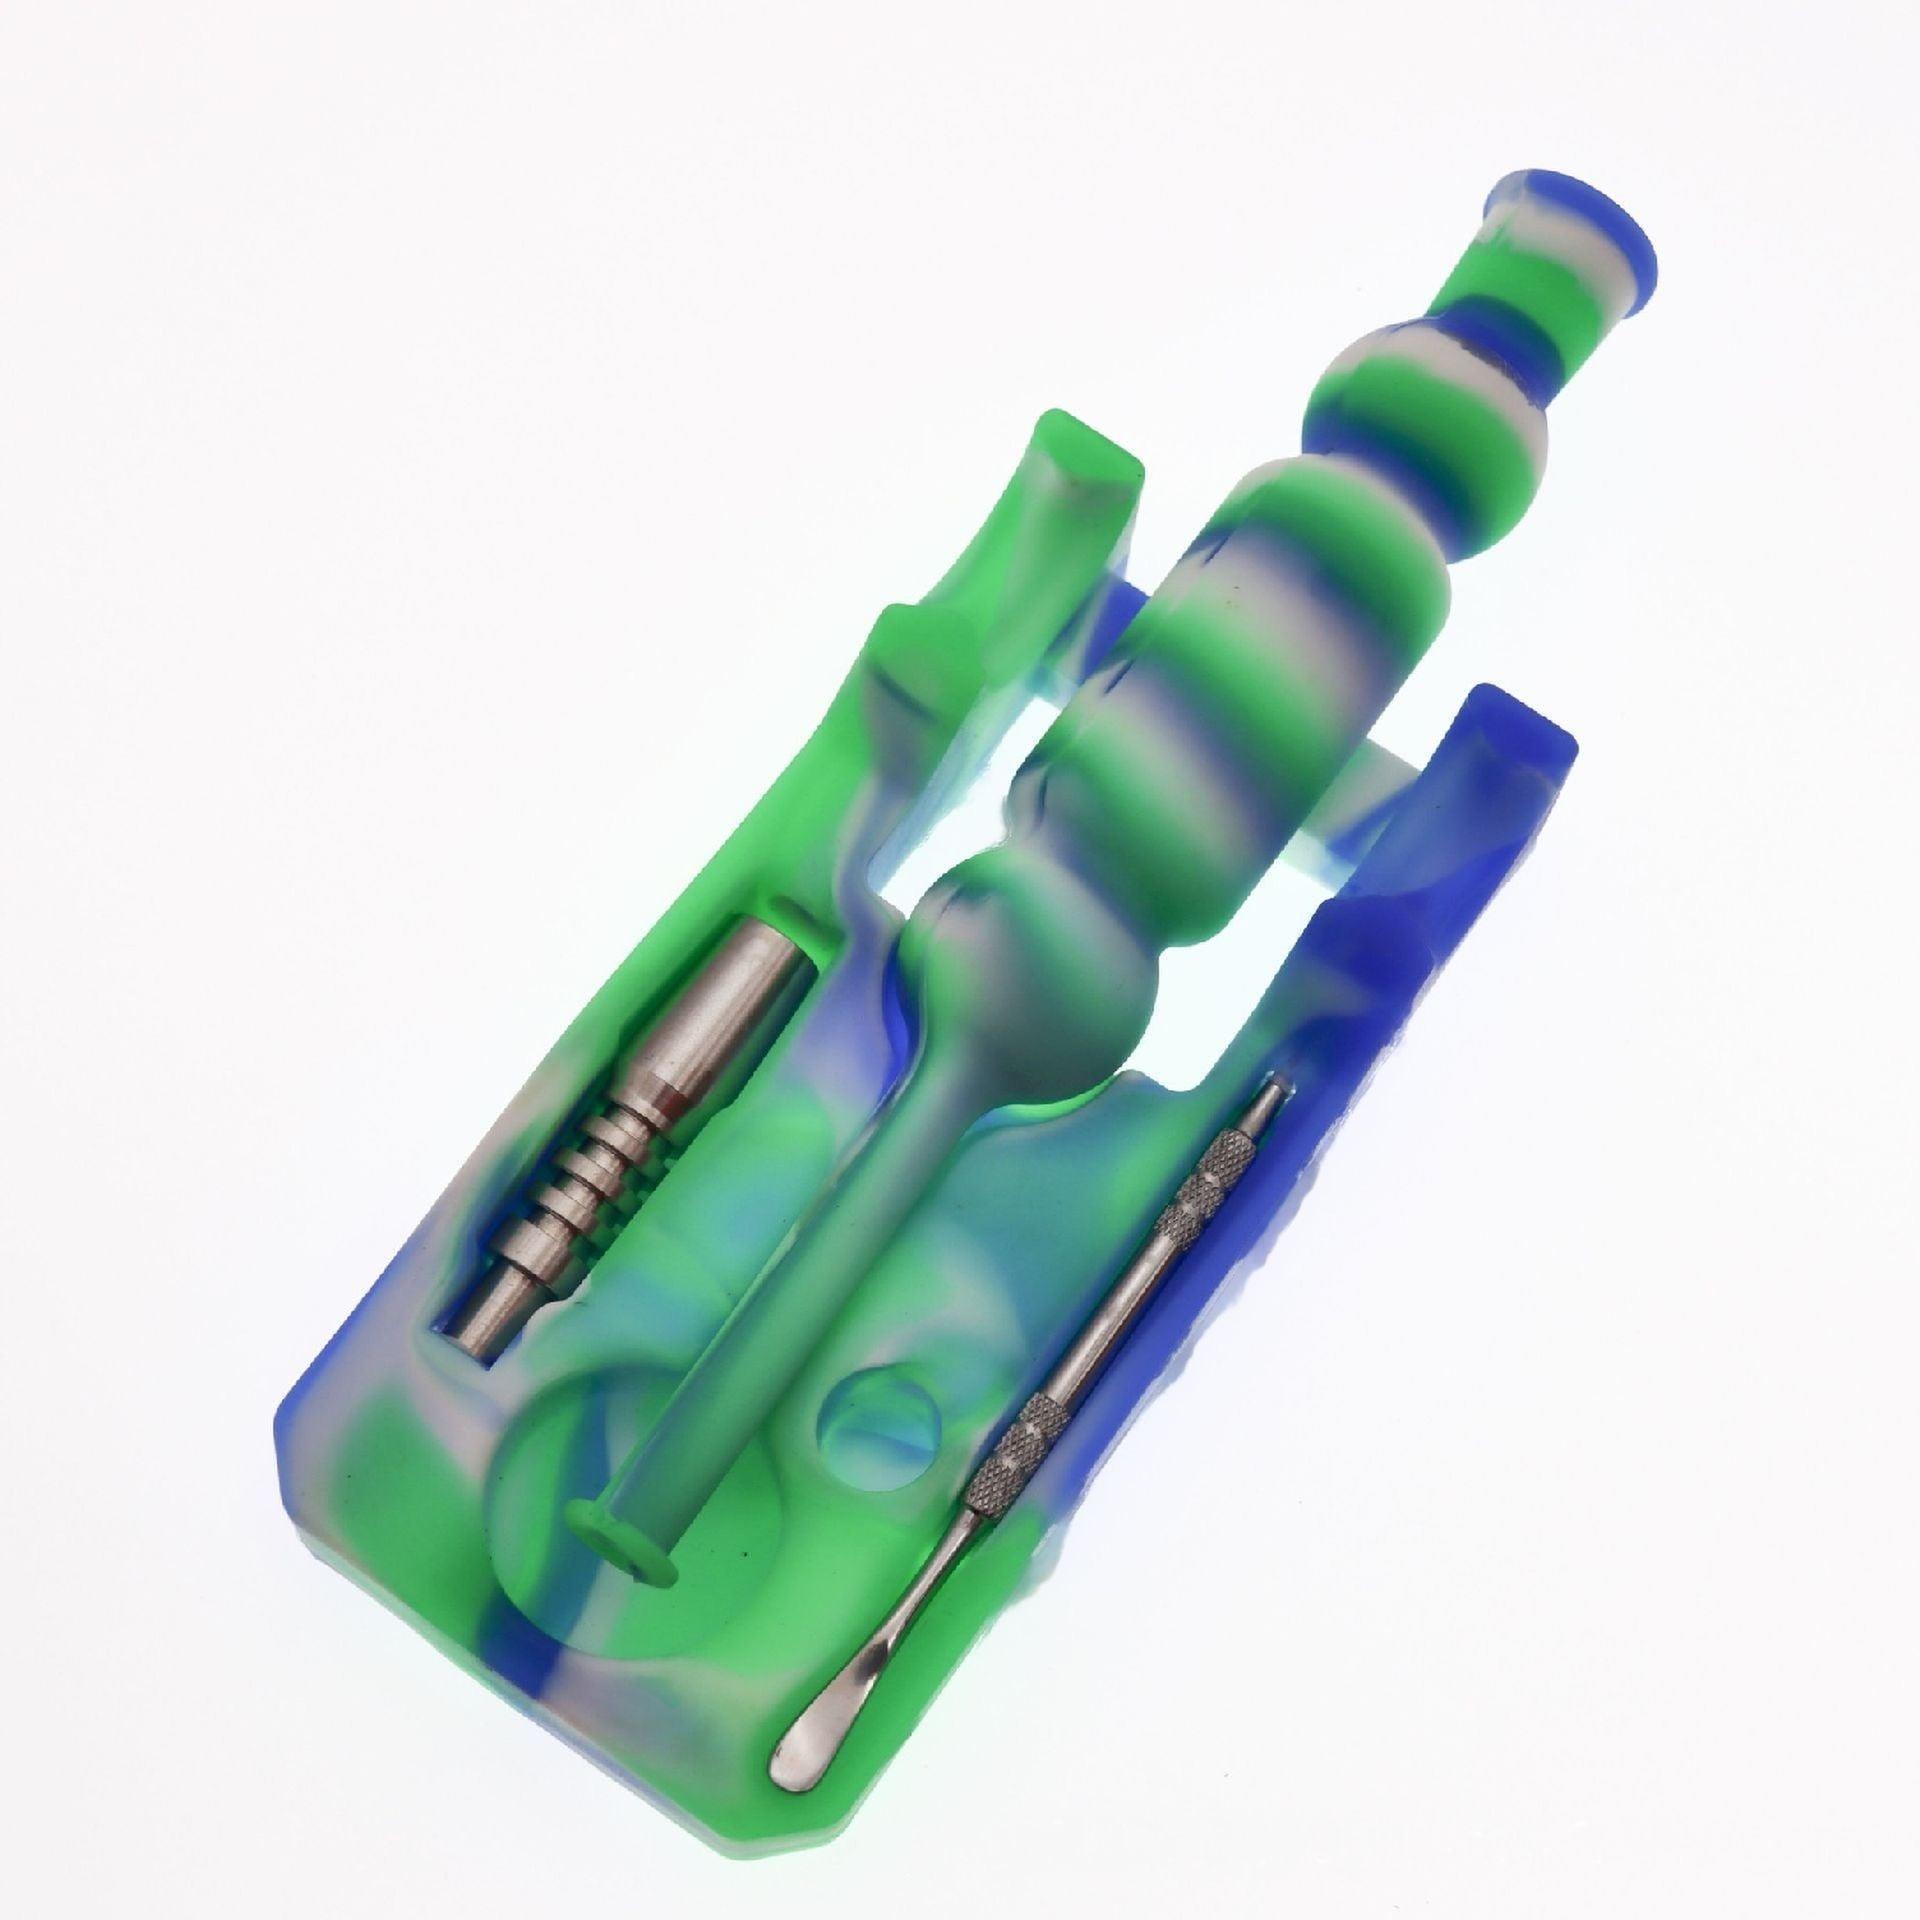 Silicone Nectar Collector Kit | Stainless Steel Durable Lightweight Portable - Puffingmaster